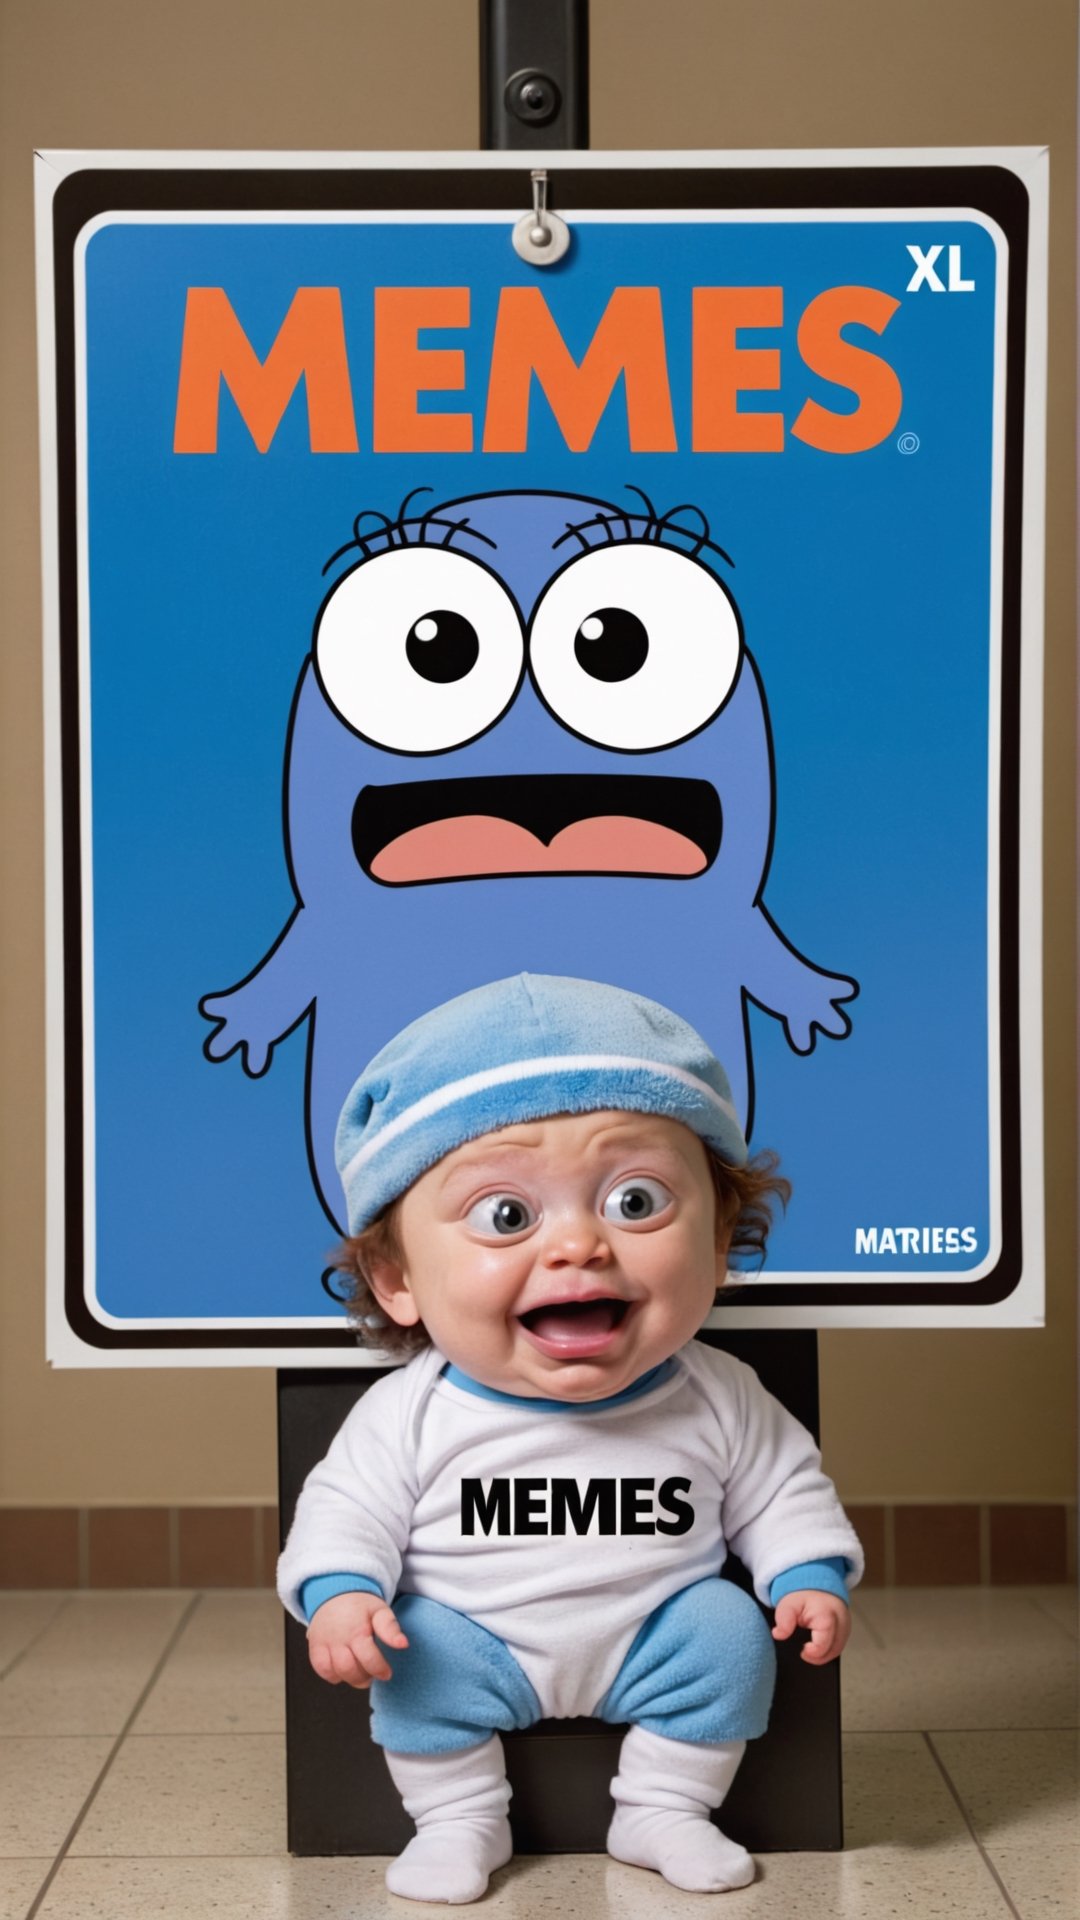 Photo of baby towelie in matrix with a sign that says "memes XL"